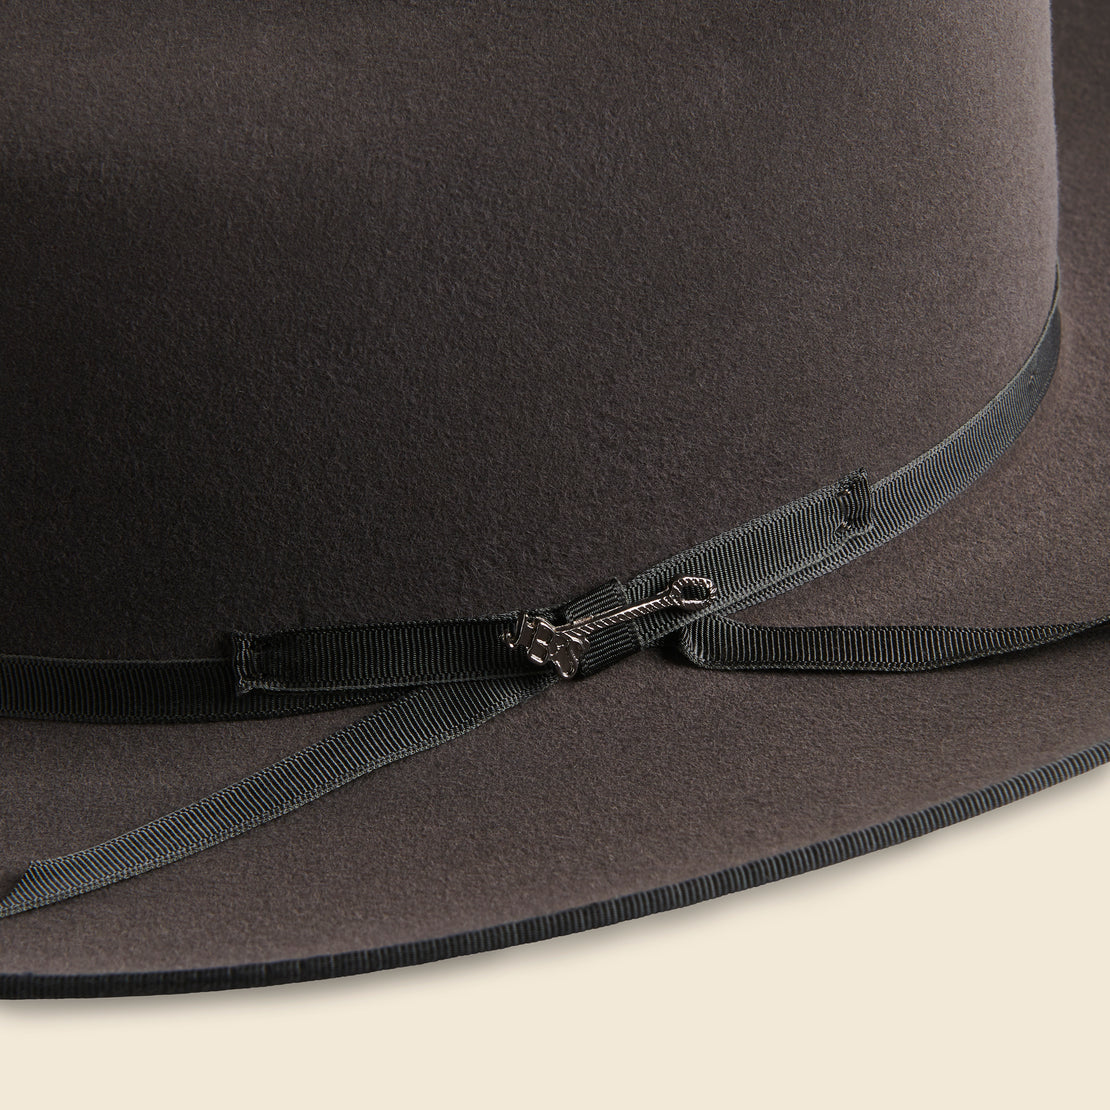 Royal Deluxe Open Road Hat - Caribou - Stetson - STAG Provisions - Accessories - Hats